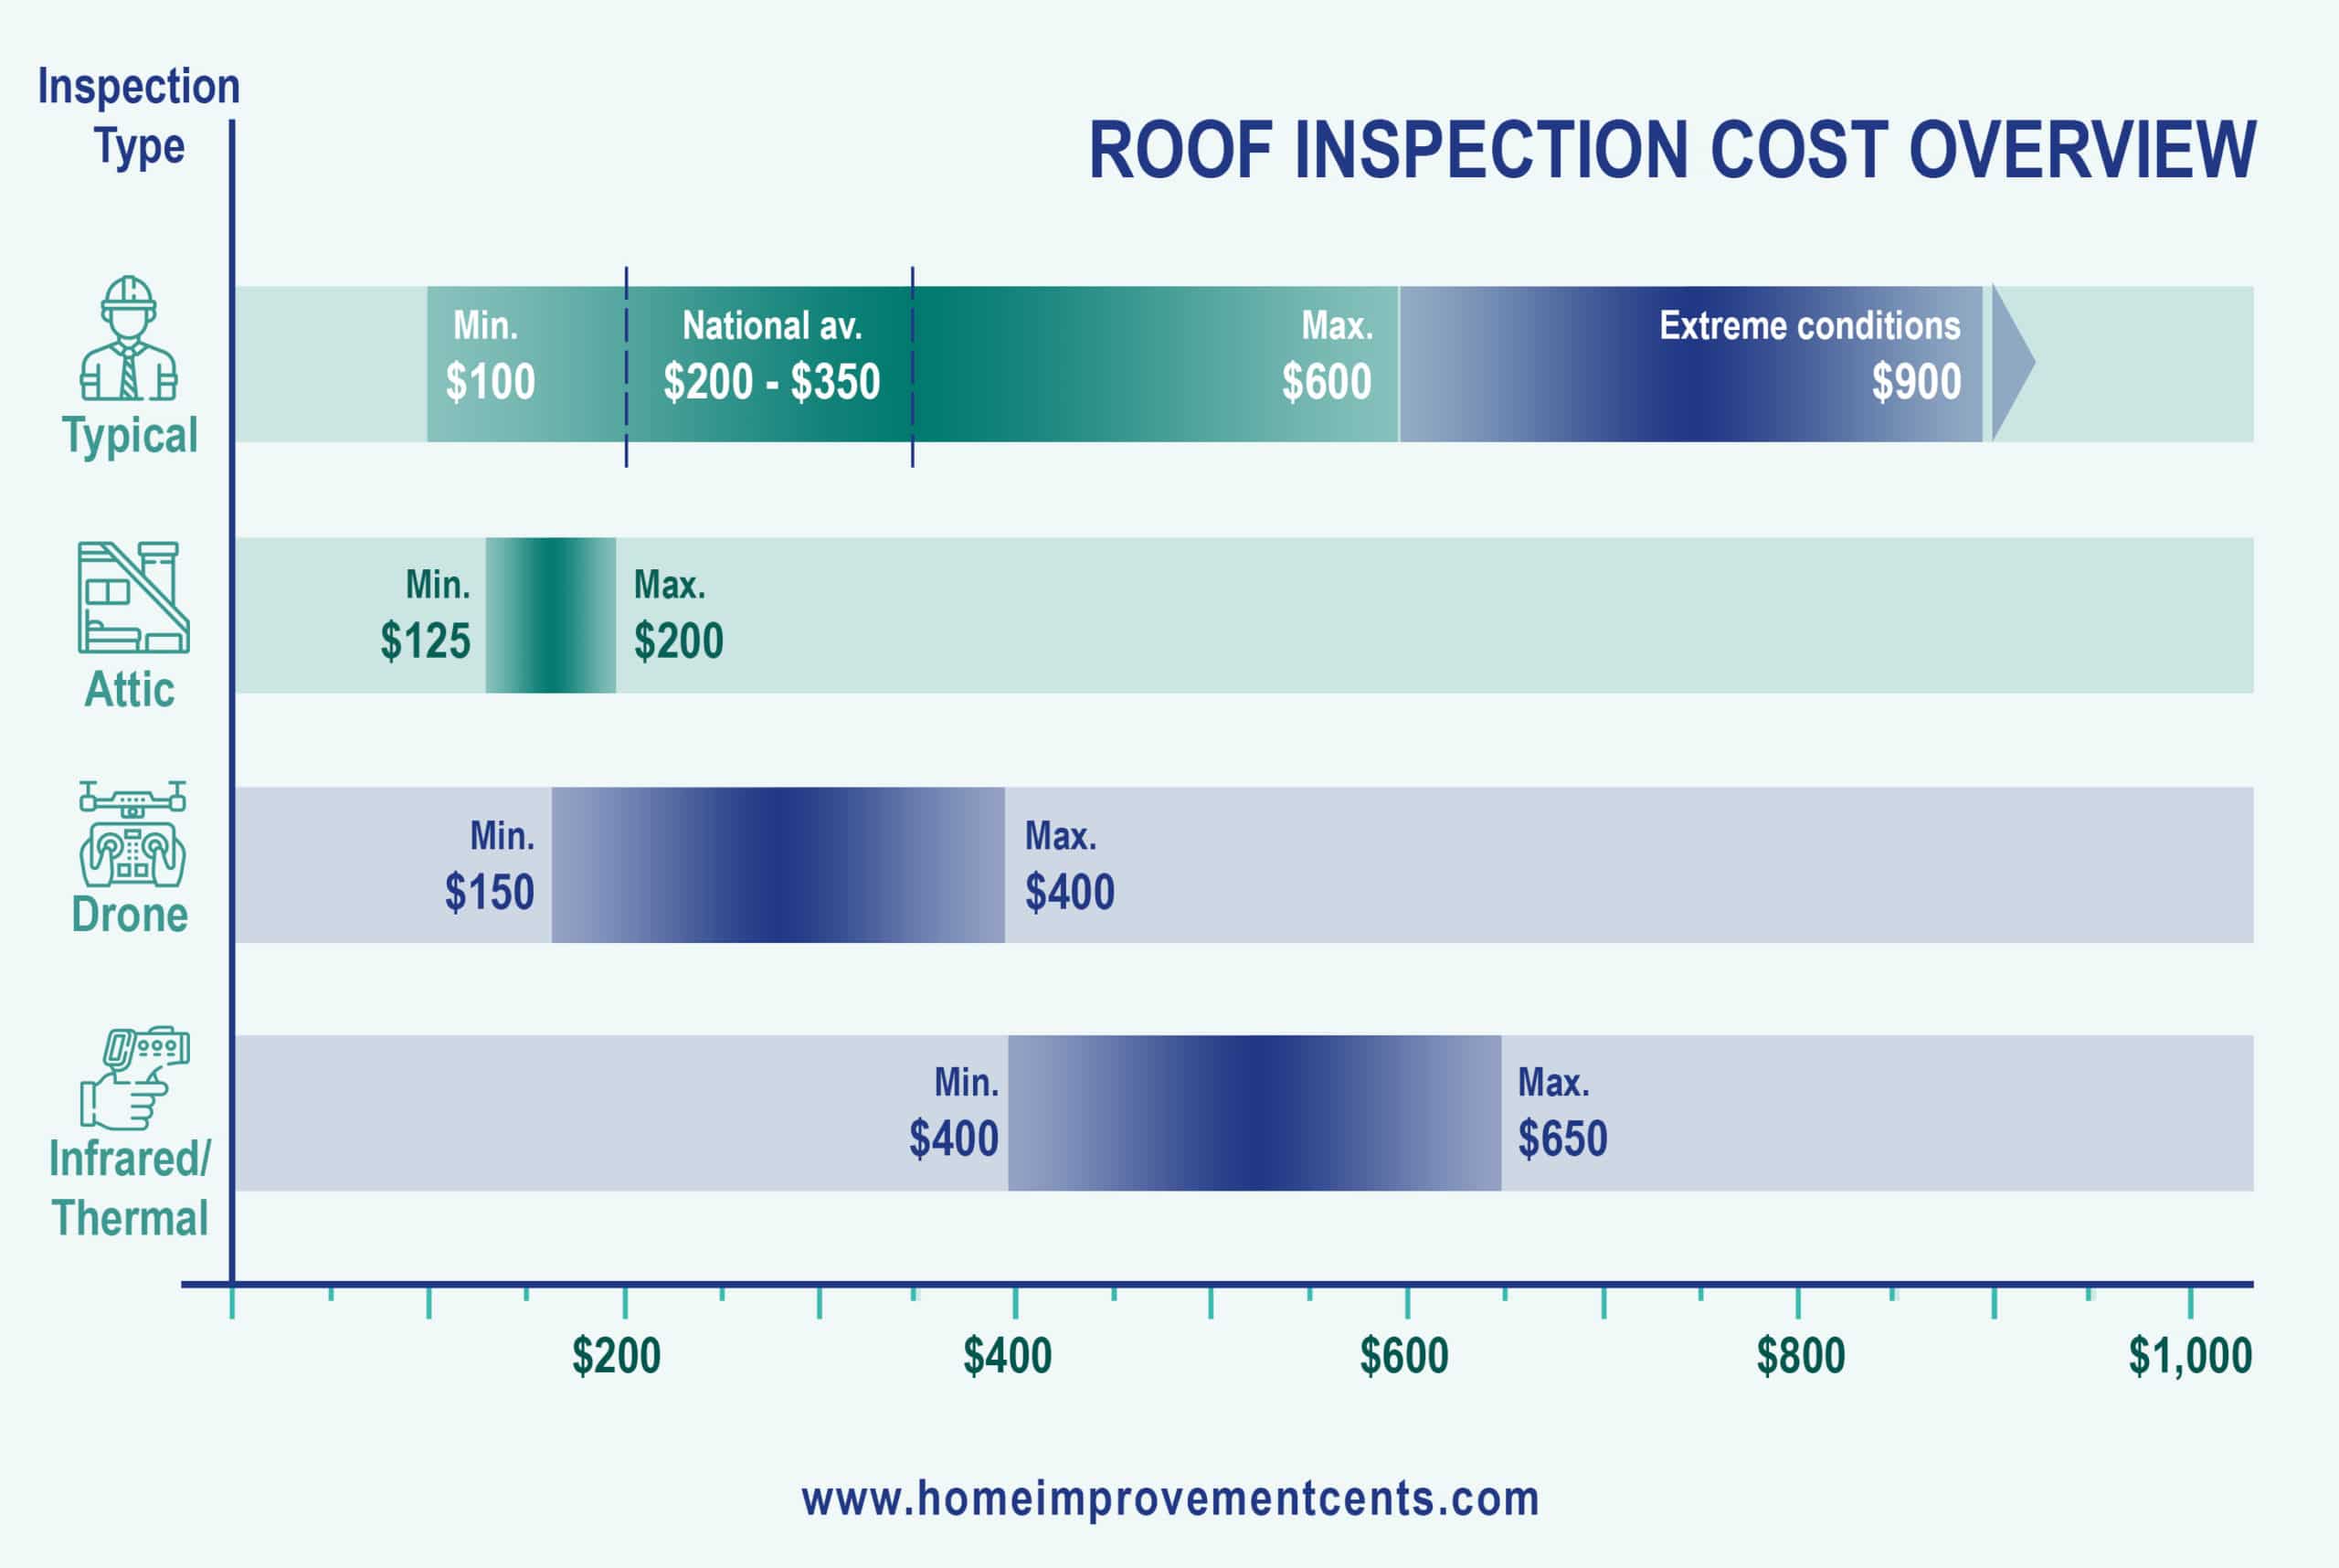 Cost overview of roof inspection